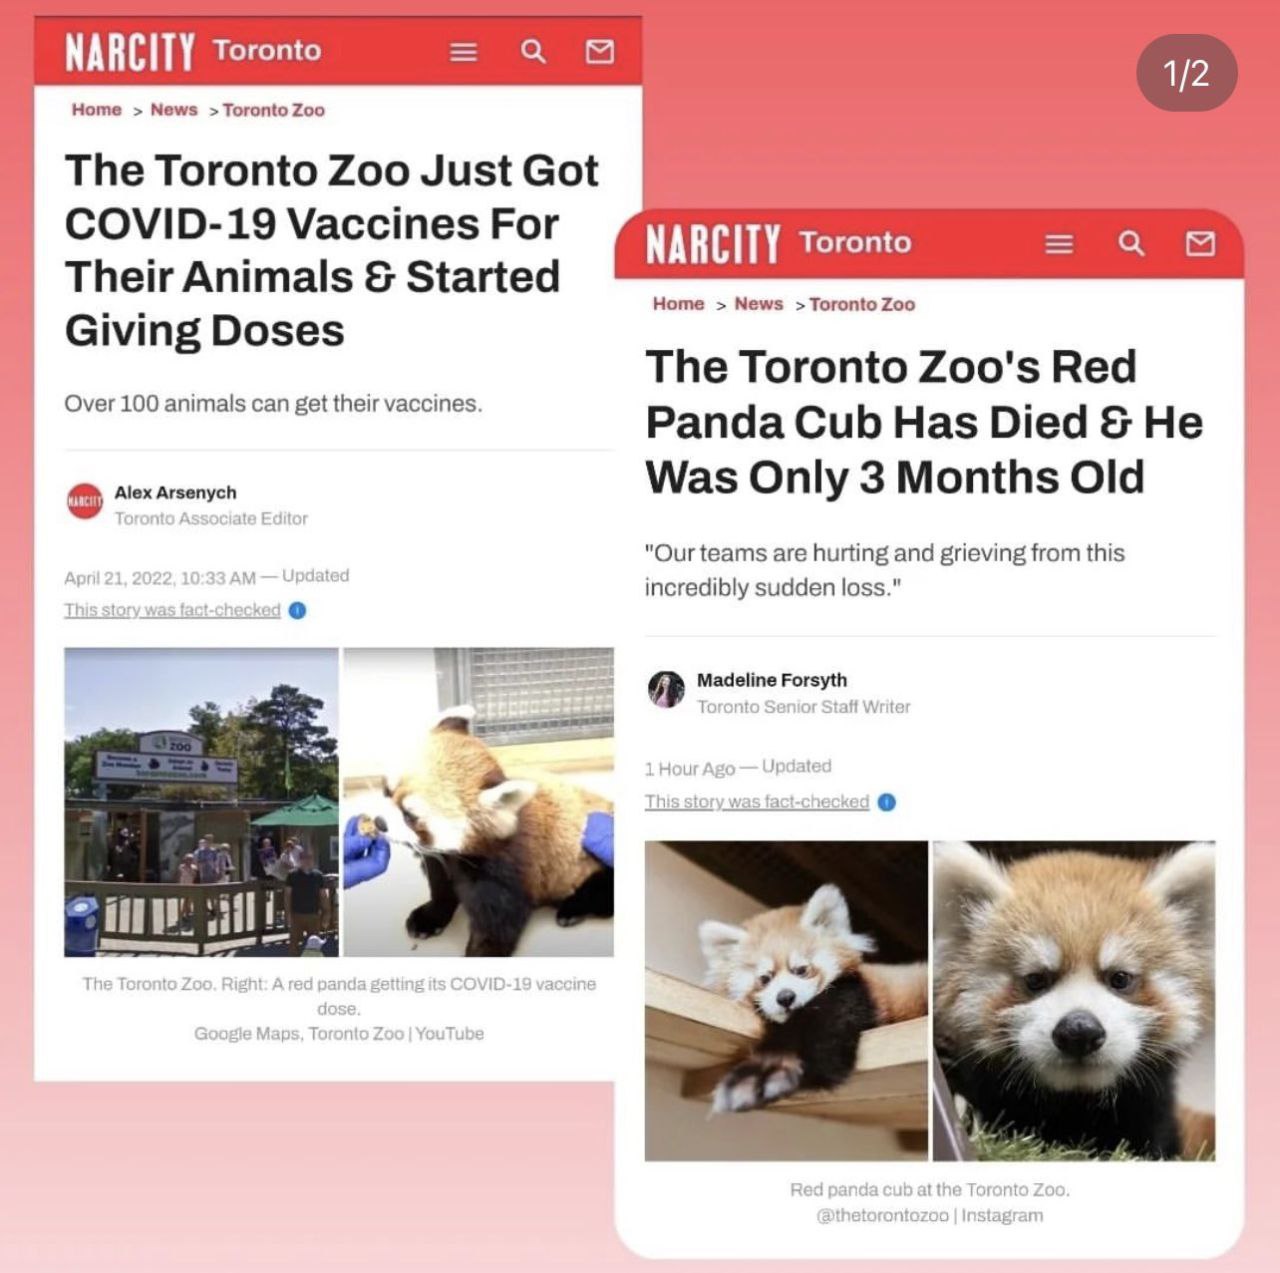 Verdacht Tiermord durch
                    "Coronaimpfung" in Toronto 26.10.2022:
                    Junger Roter Panda (3 Monate) gestorben: The Toronto
                    Zoo's Red Panda Cub Has Died & He Was Only 3
                    Months Old